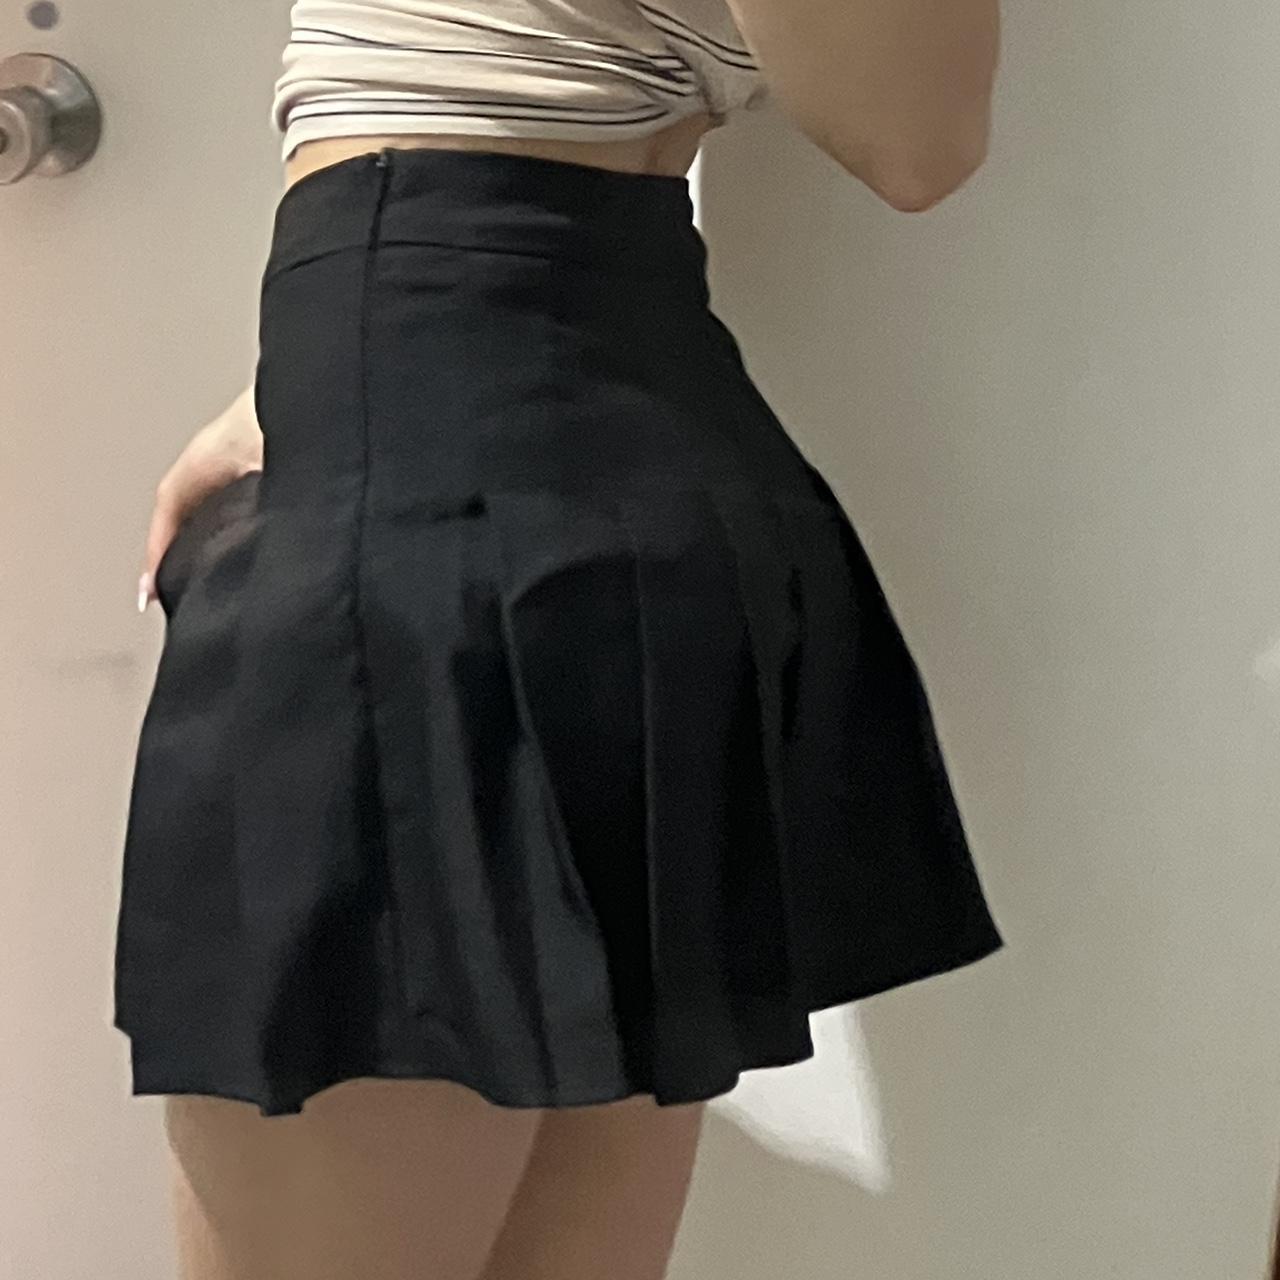 School girl skirt with shorts, no brand name. China - Depop